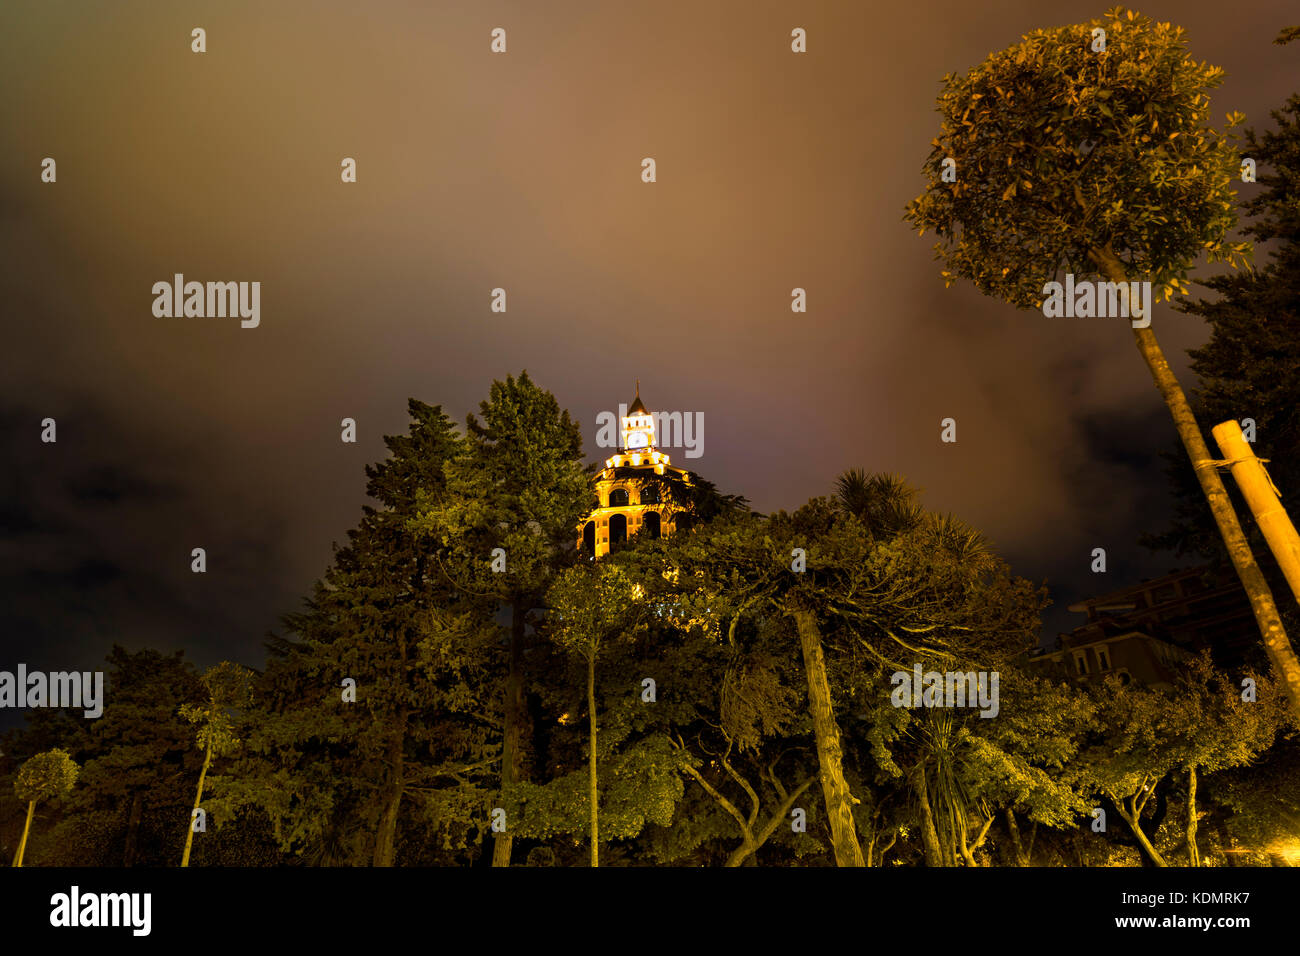 A Cathedral surrounded by trees in a stormy weather Stock Photo